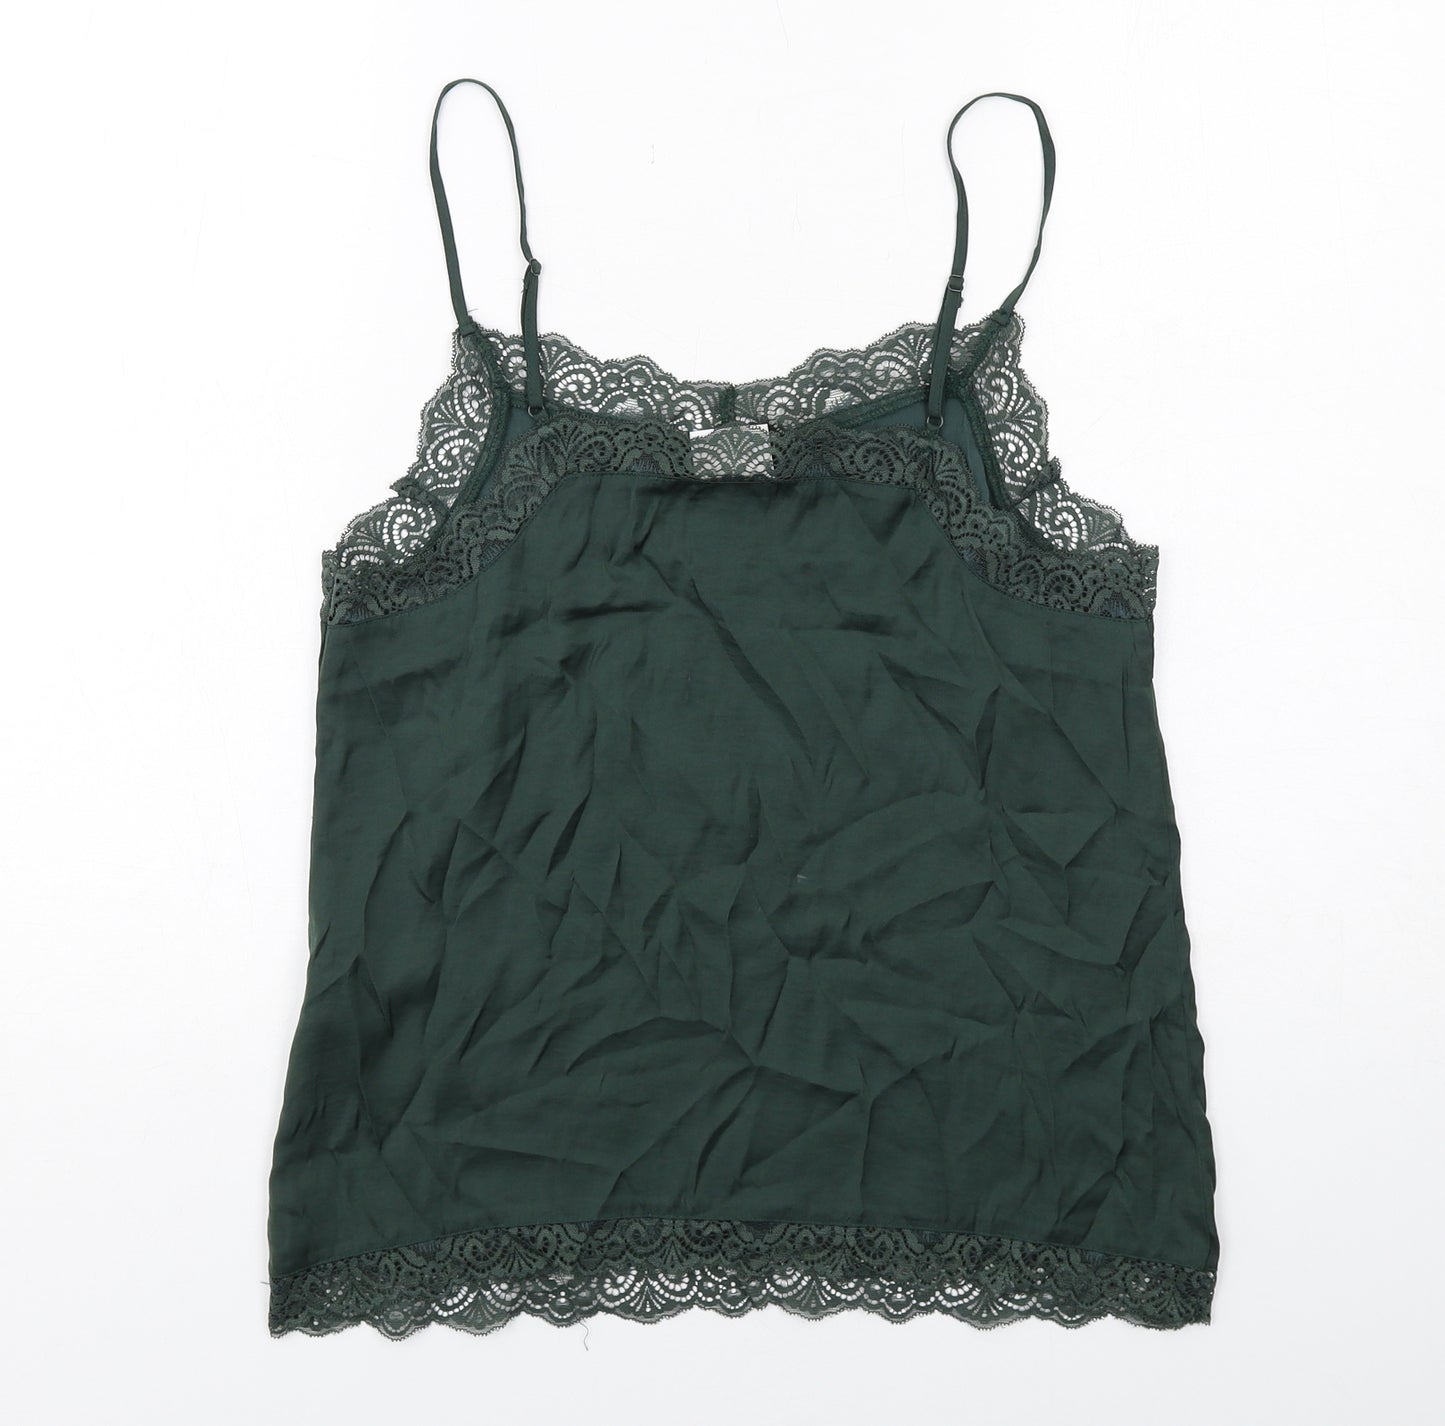 VILA Womens Green Polyester Camisole Tank Size M Scoop Neck - Lace Trim